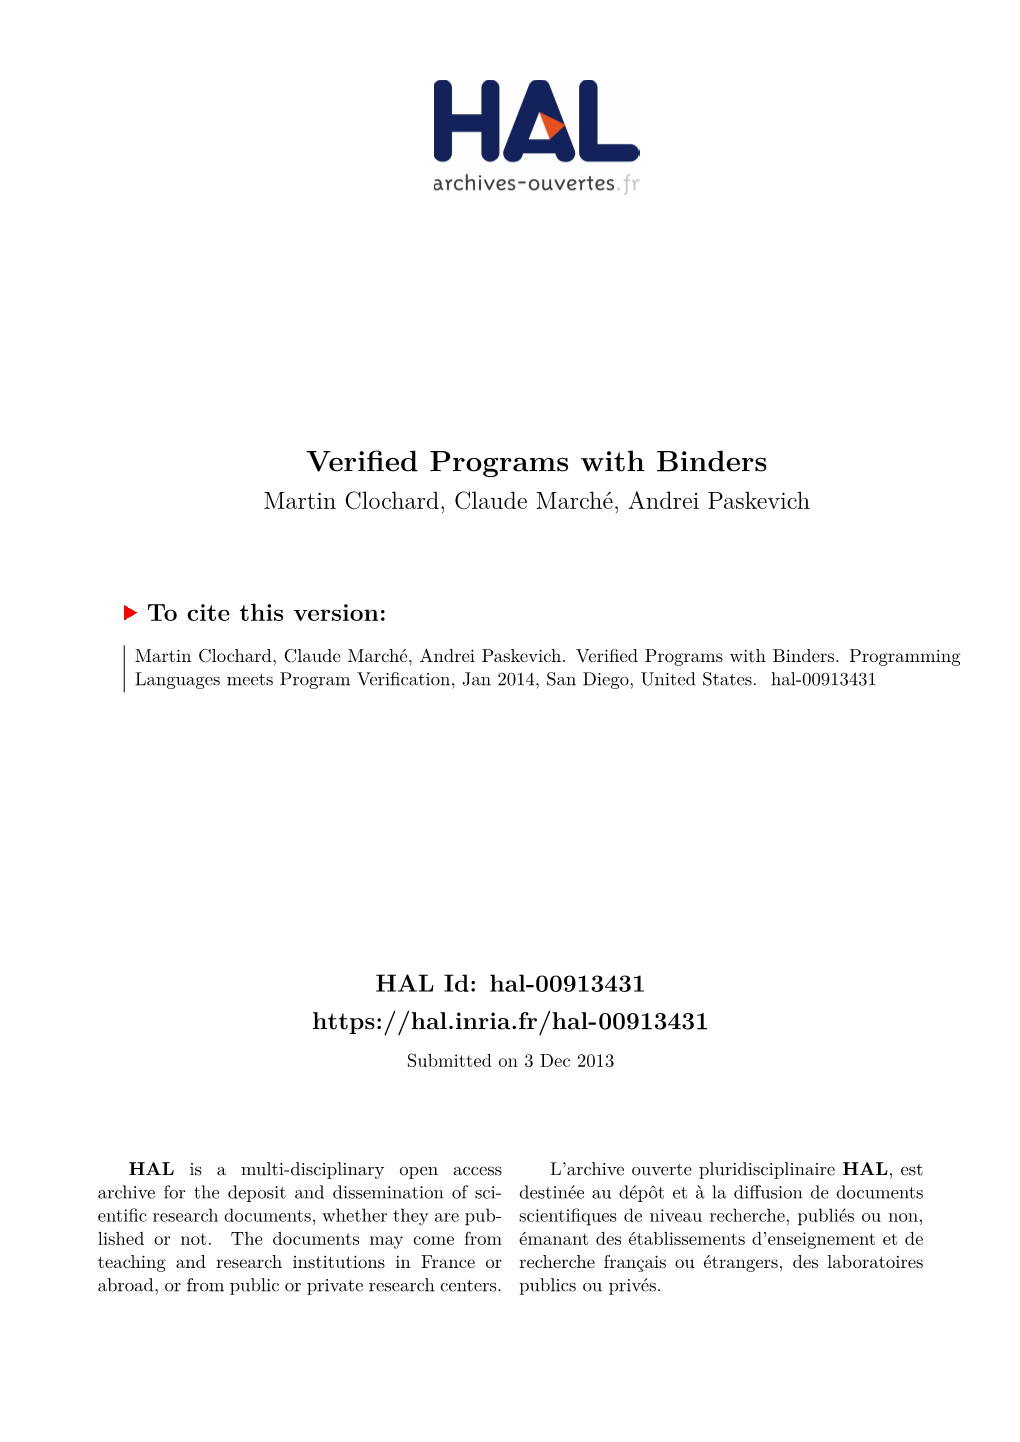 Verified Programs with Binders Martin Clochard, Claude Marché, Andrei Paskevich